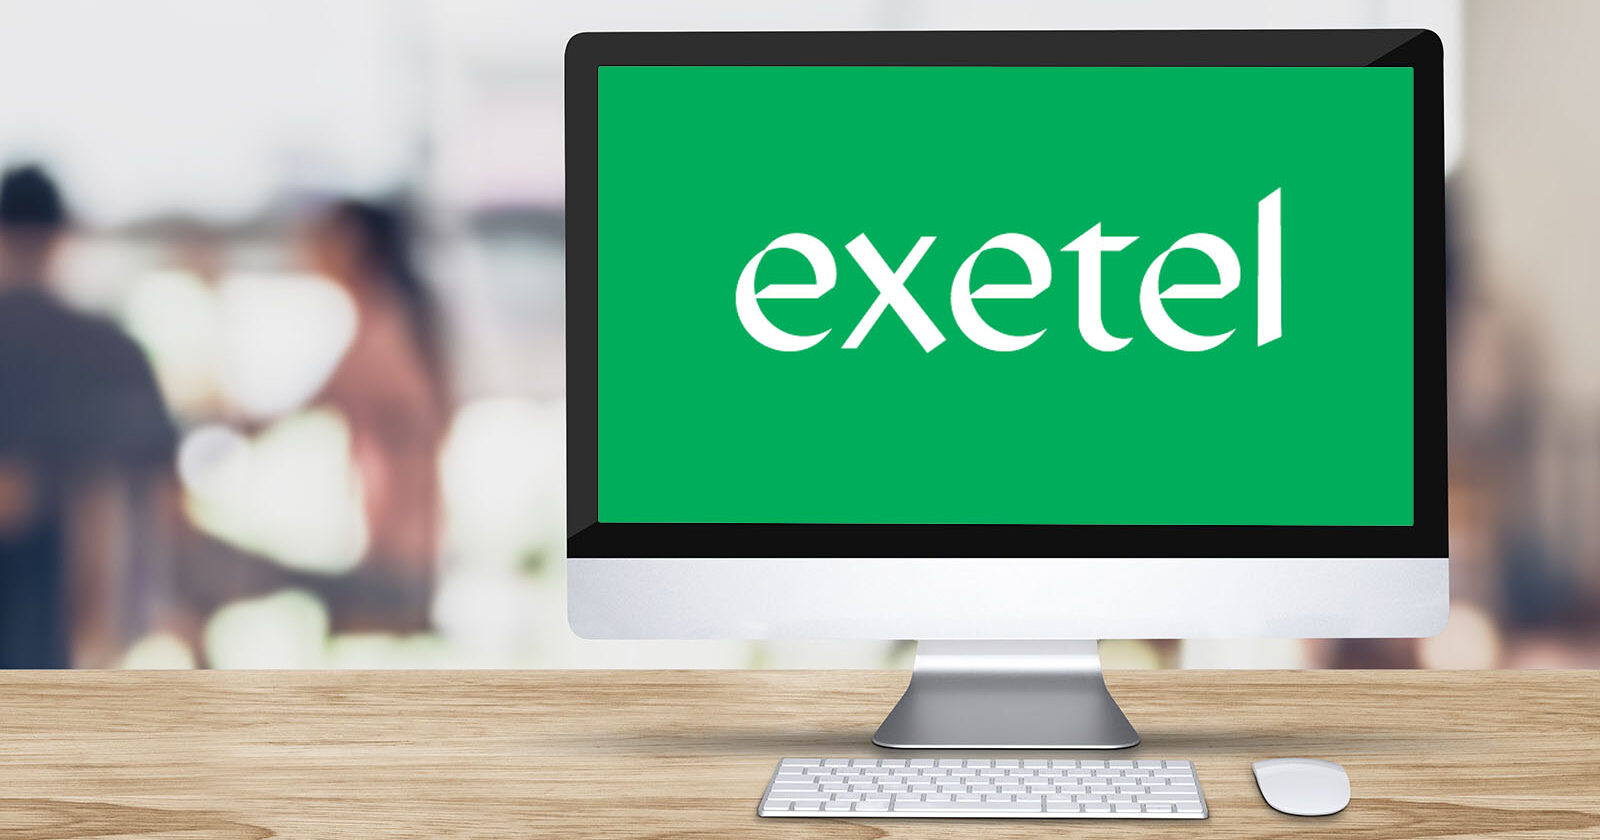 Exetel NBN Internet review: Put Exetel's speed to the test | Reviews ...